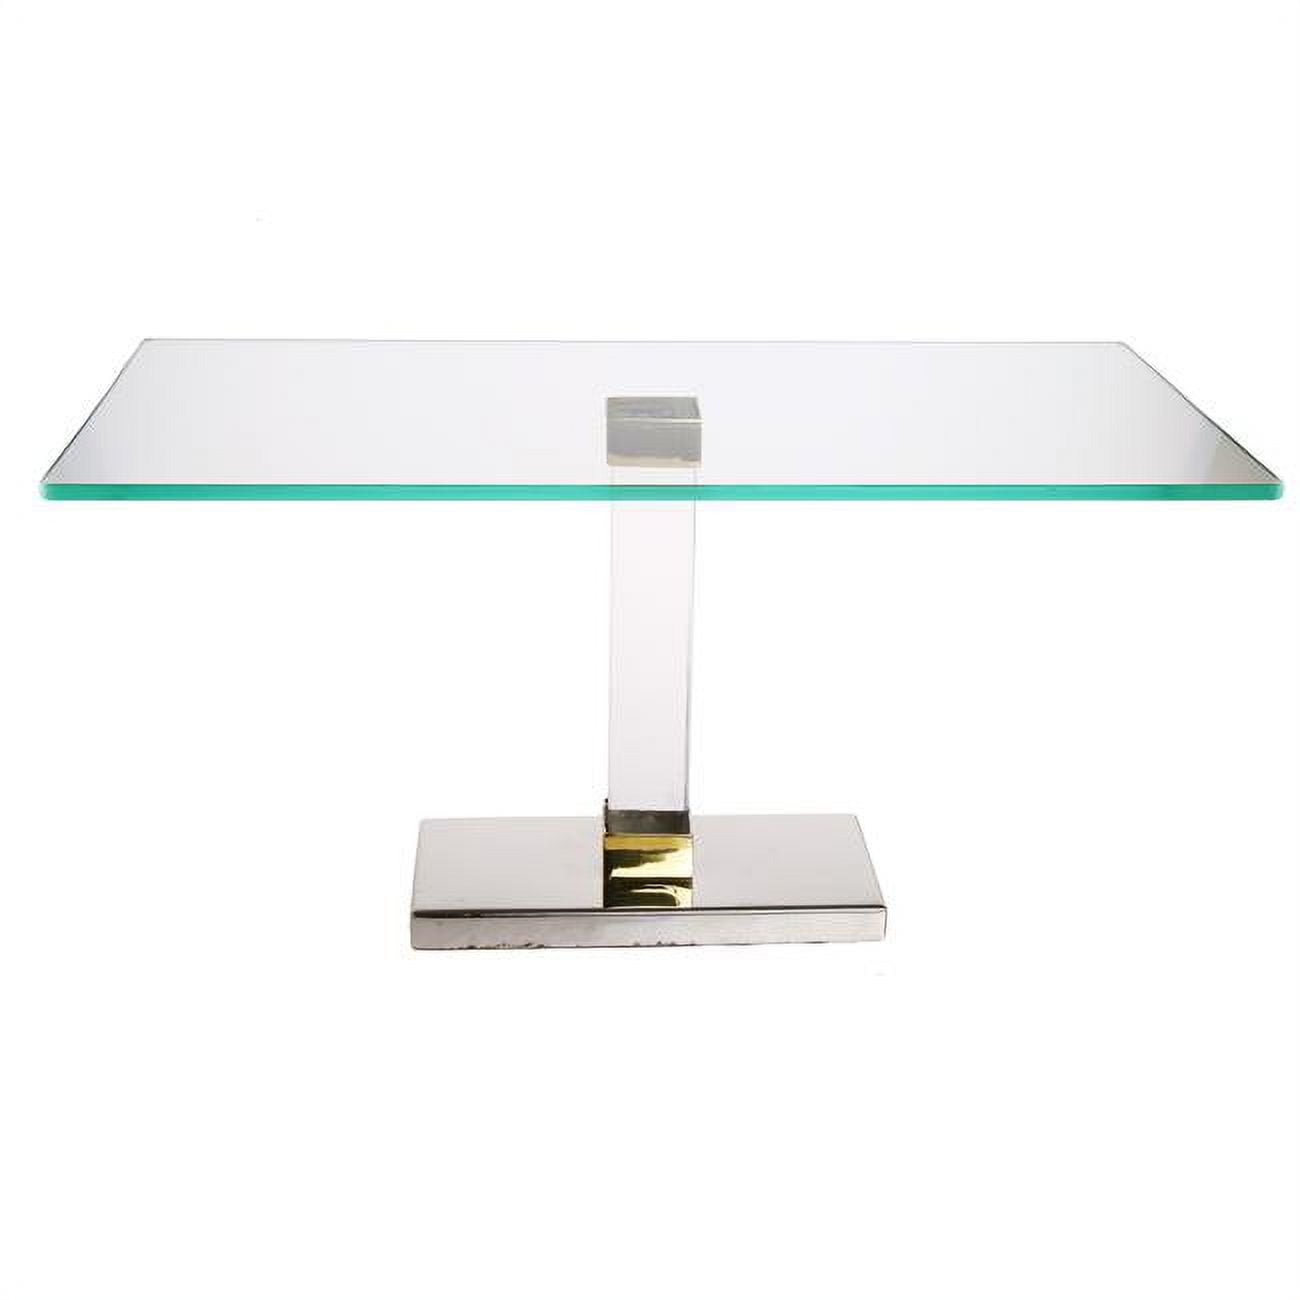 Picture of Classic Touch GAT107 Glass Rectangular Cake Stand with Acrylic Stem - 14.5 x 8 x 7.25 in.